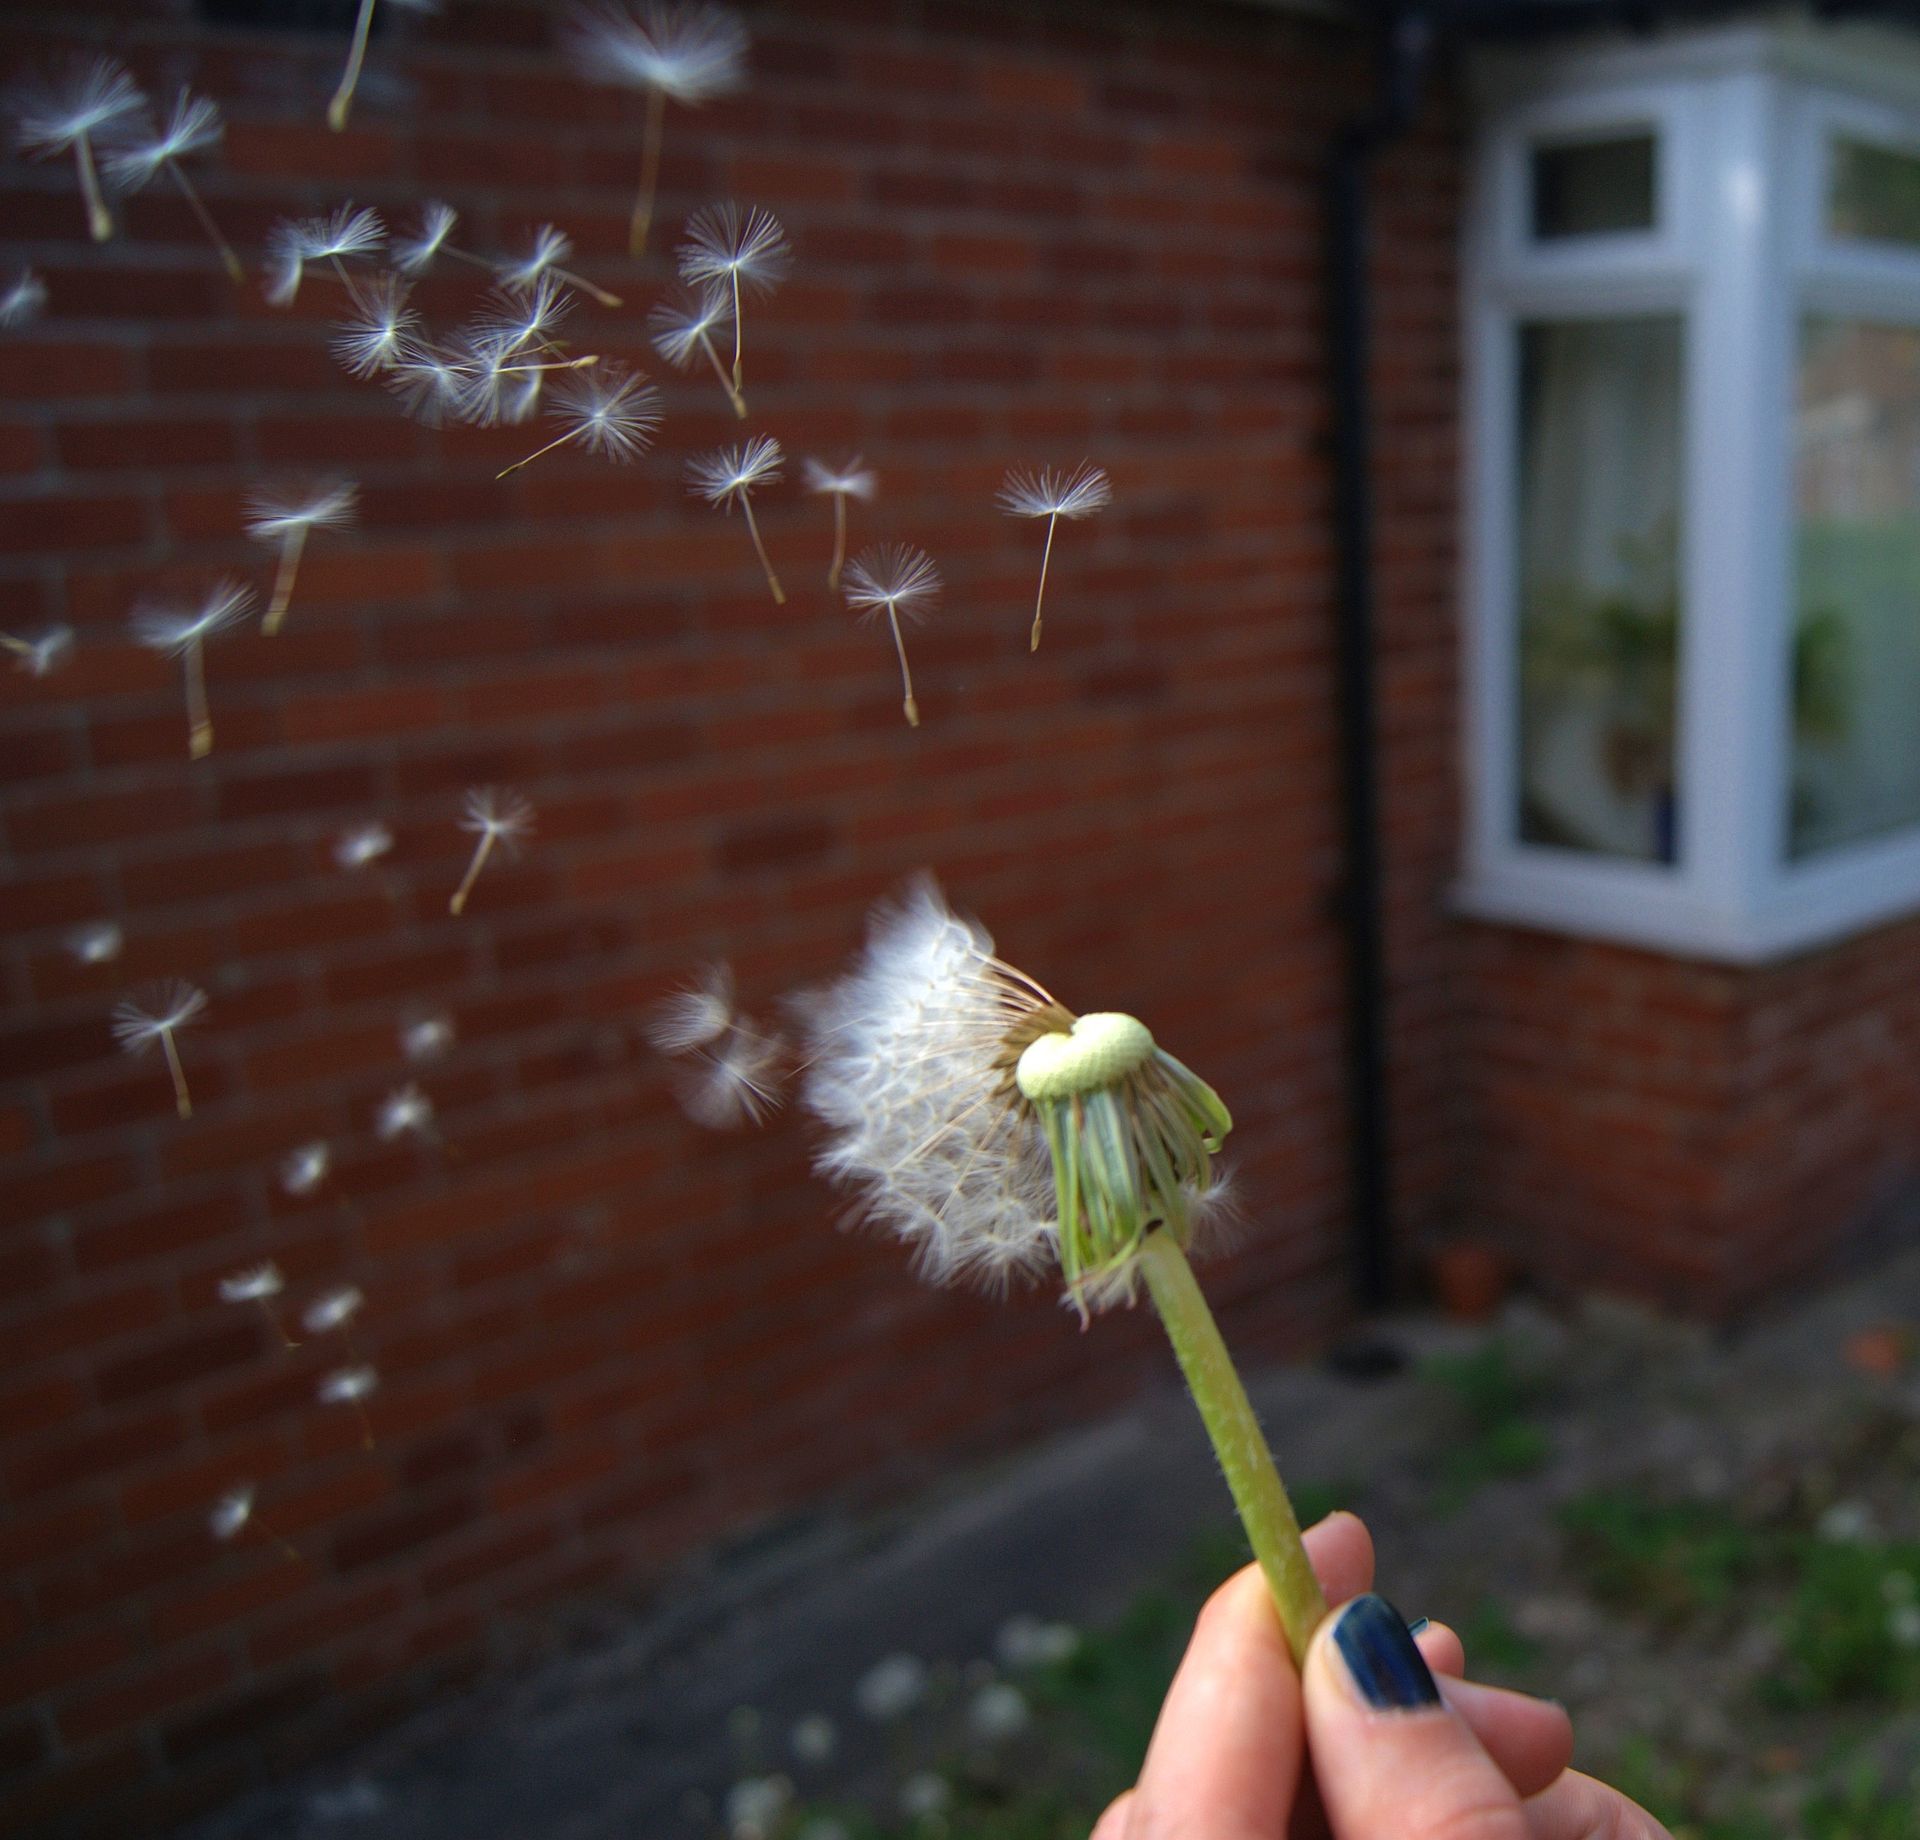 Dandelion seeds being dispersed by an air current